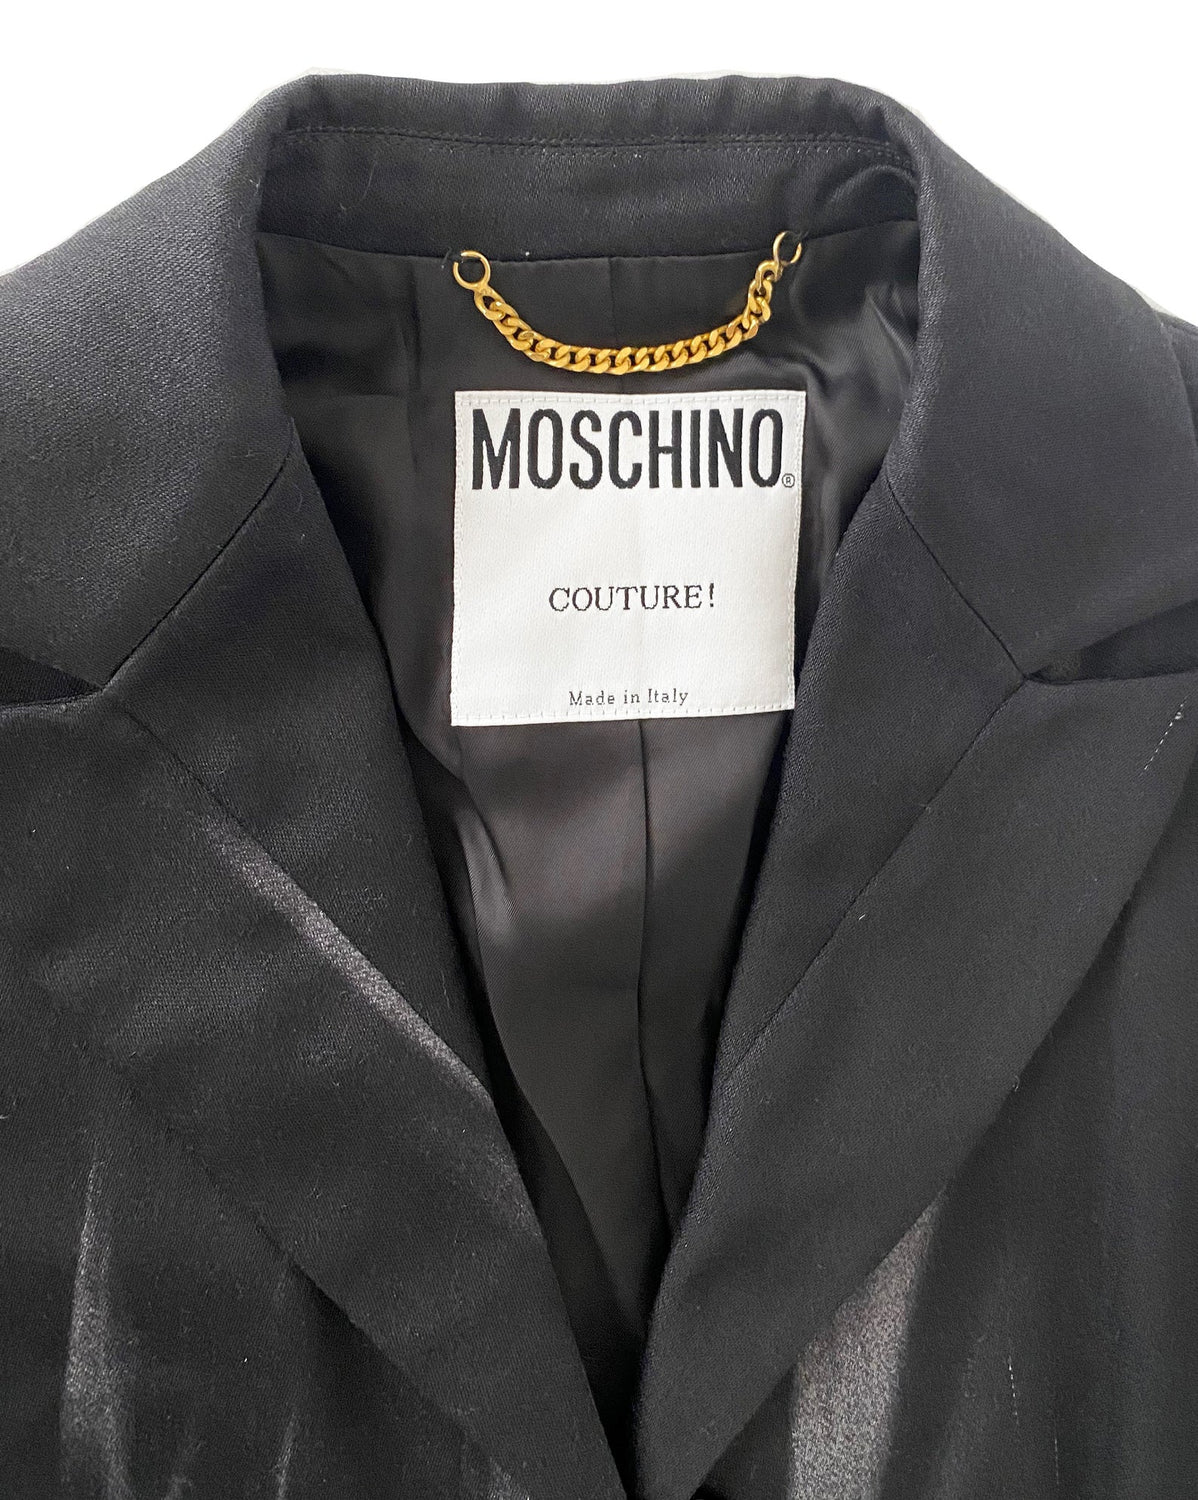 FRUIT Vintage Moschino 90s Flame Jacket as worn by Fran Drescher on the Nanny! It features a flame and smoke print on the hem line and sleeves going up the jacket. 